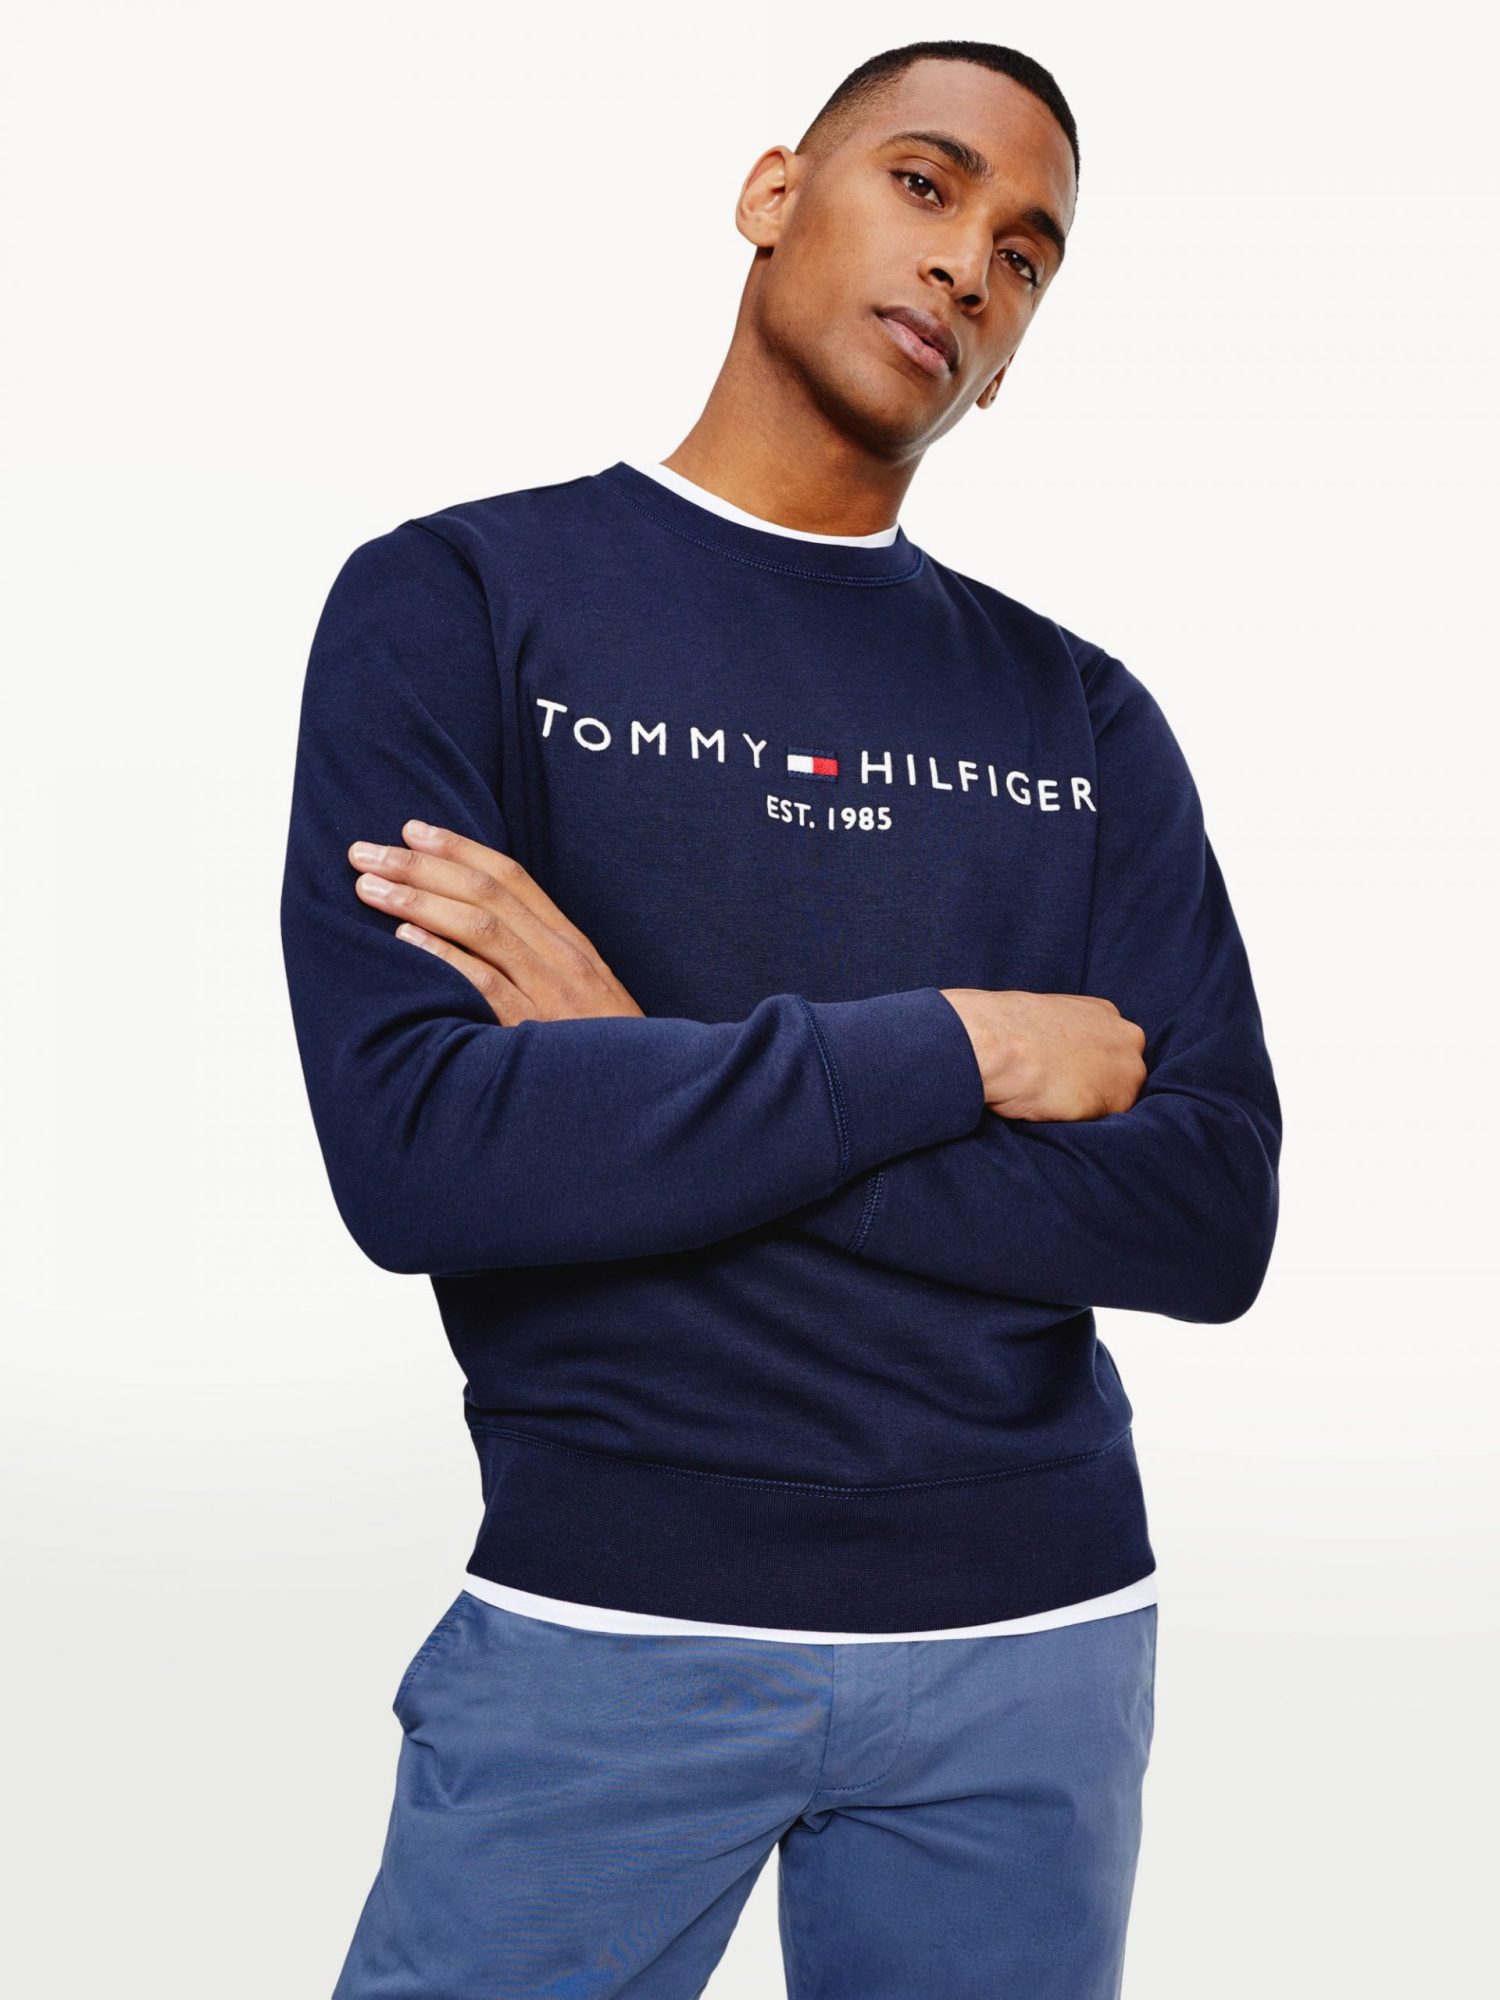 TOMMY HILFIGER NAVY LOGO SWEAT | Morans Menswear and Clothing, Thurles ...